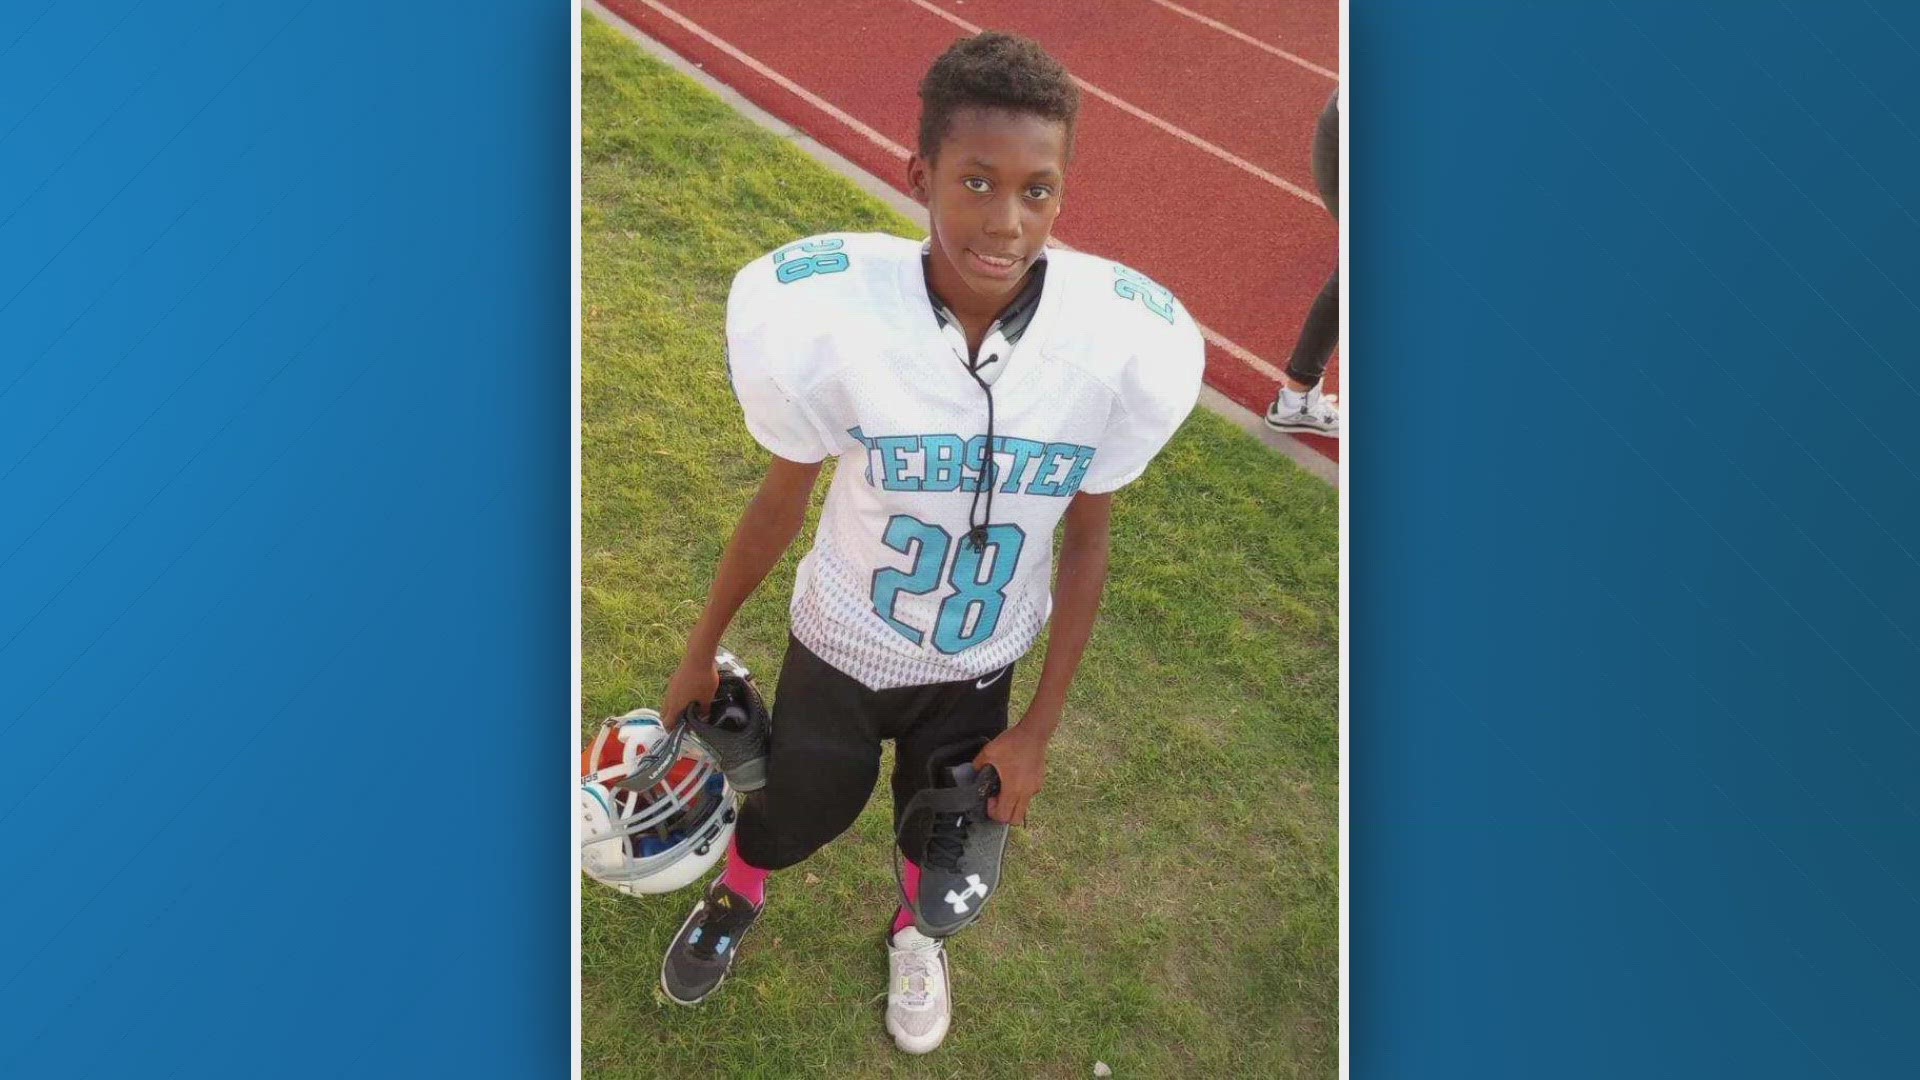 Kameron Turner is not expected to survive, his family said.